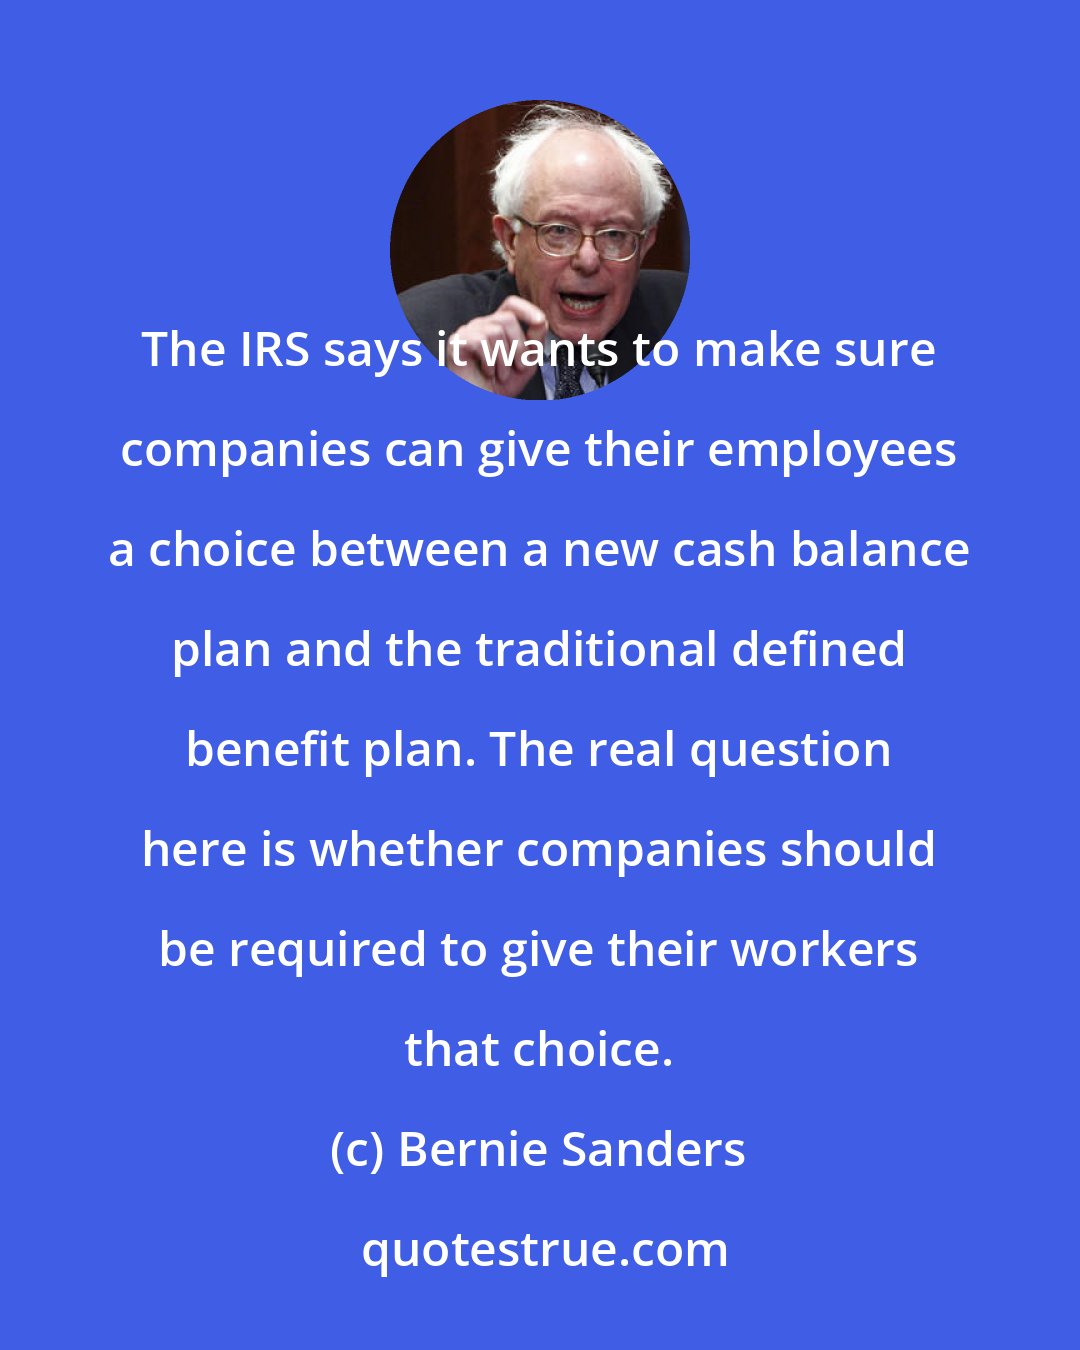 Bernie Sanders: The IRS says it wants to make sure companies can give their employees a choice between a new cash balance plan and the traditional defined benefit plan. The real question here is whether companies should be required to give their workers that choice.